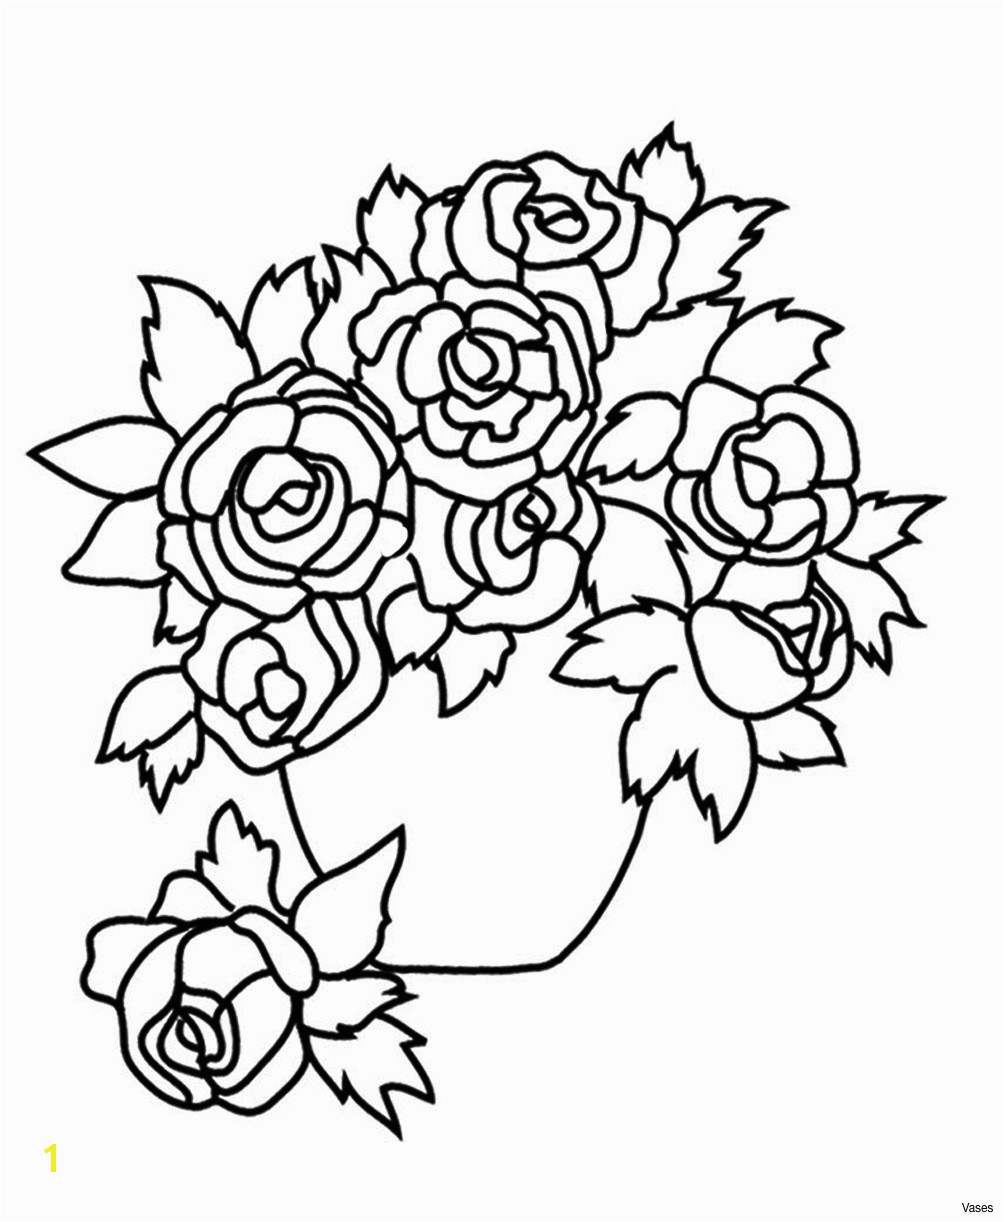 Coloring Pages Of Real Roses Coloring Book Flowers New Coloring Book Image New sol R